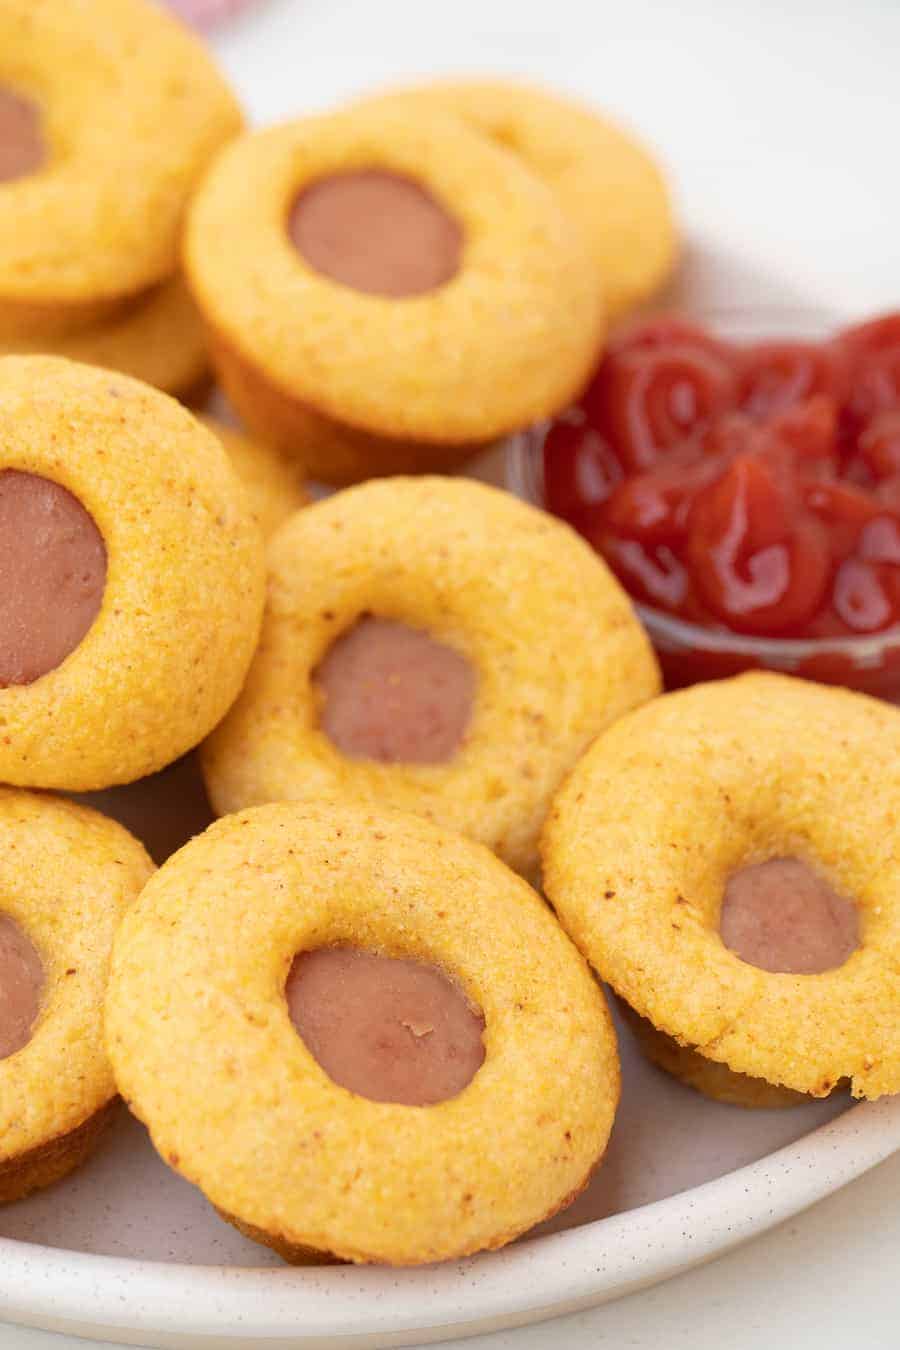 Mini baked corn dogs are a winner recipe because they're foolproof to throw together and they taste delicious for a quick and easy dinner or app! #corndogs #minicorndog #hotdog